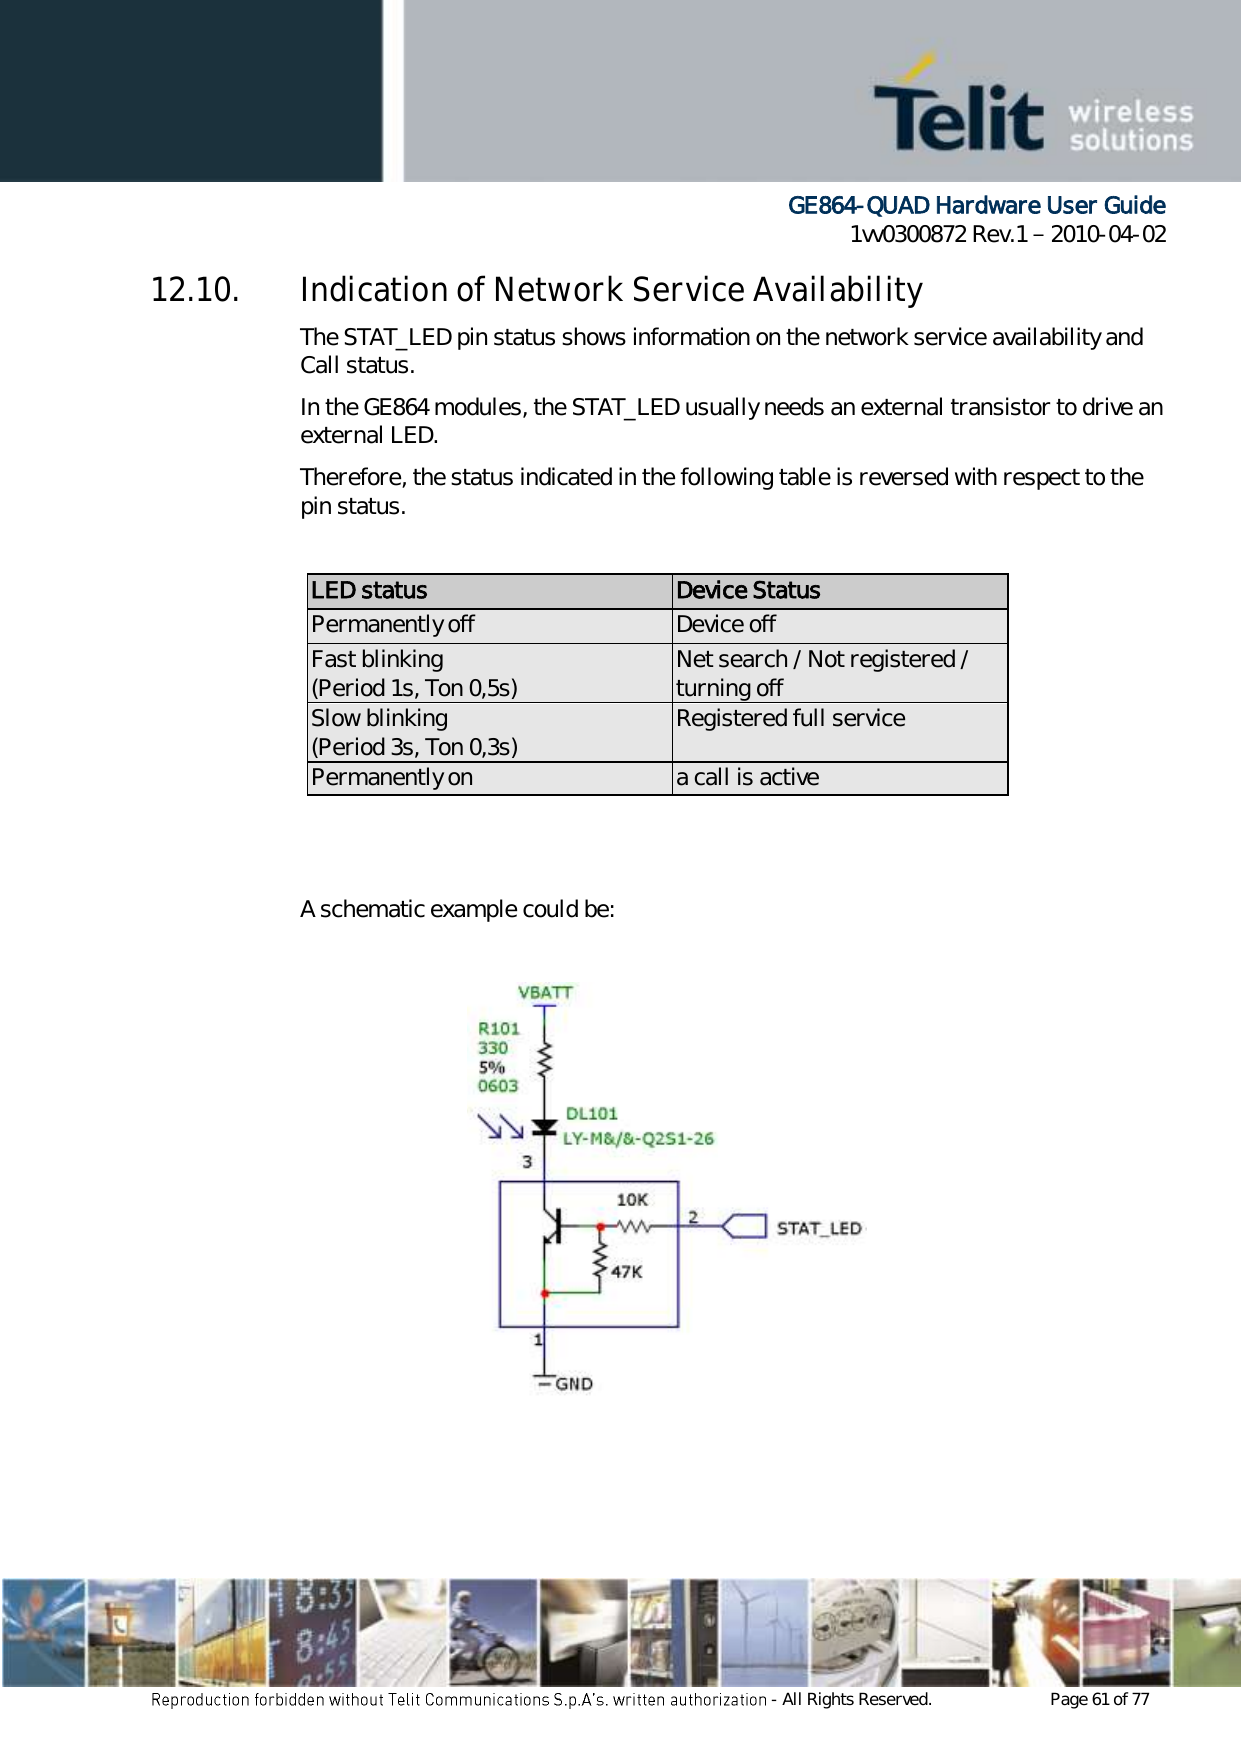      GE864-QUAD Hardware User Guide 1vv0300872 Rev.1   2010-04-02 - All Rights Reserved.    Page 61 of 77  12.10. Indication of Network Service Availability The STAT_LED pin status shows information on the network service availability and Call status. In the GE864 modules, the STAT_LED usually needs an external transistor to drive an external LED. Therefore, the status indicated in the following table is reversed with respect to the pin status.  LED status Device Status Permanently off Device off Fast blinking (Period 1s, Ton 0,5s) Net search / Not registered / turning off Slow blinking (Period 3s, Ton 0,3s) Registered full service Permanently on a call is active    A schematic example could be:             